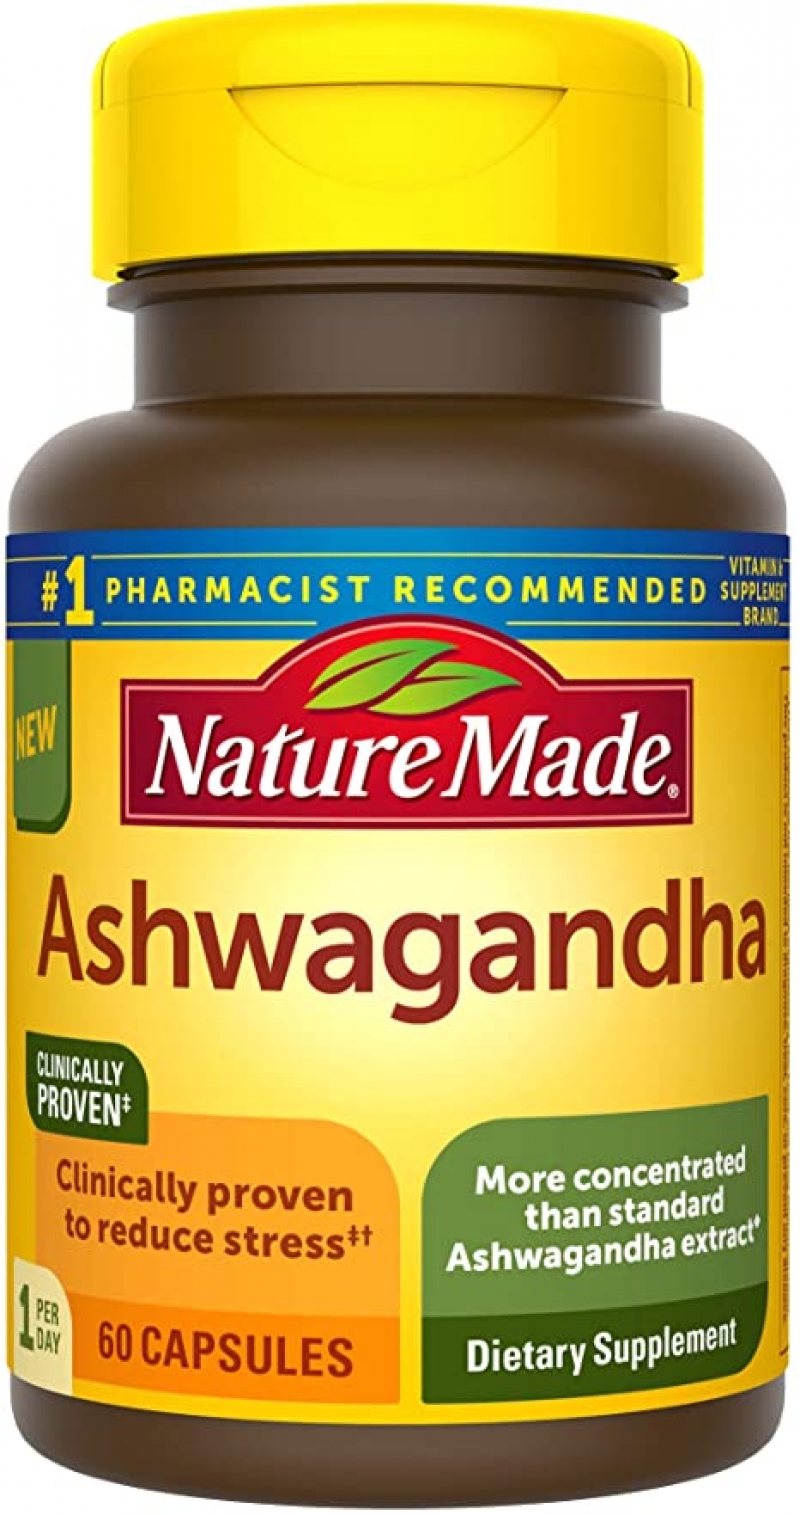 ihocon: [減壓] Nature Made Ashwagandha Capsules 125 mg, 60 Count for Stress Reduction 南非醉茄(印度人蔘)膠囊